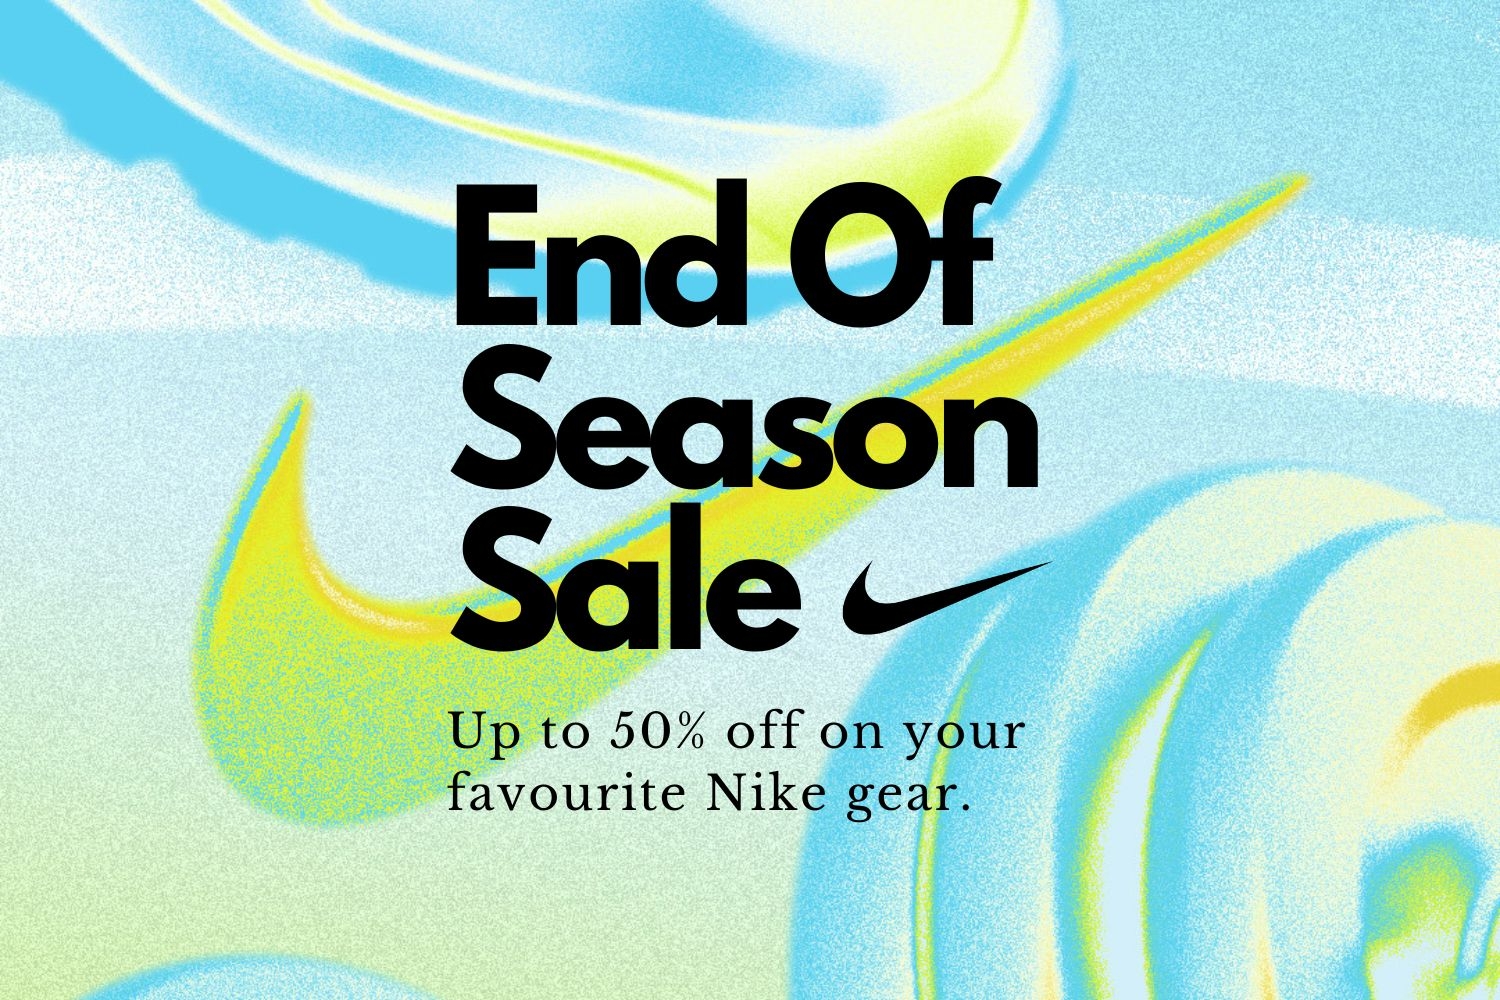 The Nike End Of Season sale with up to 50% off